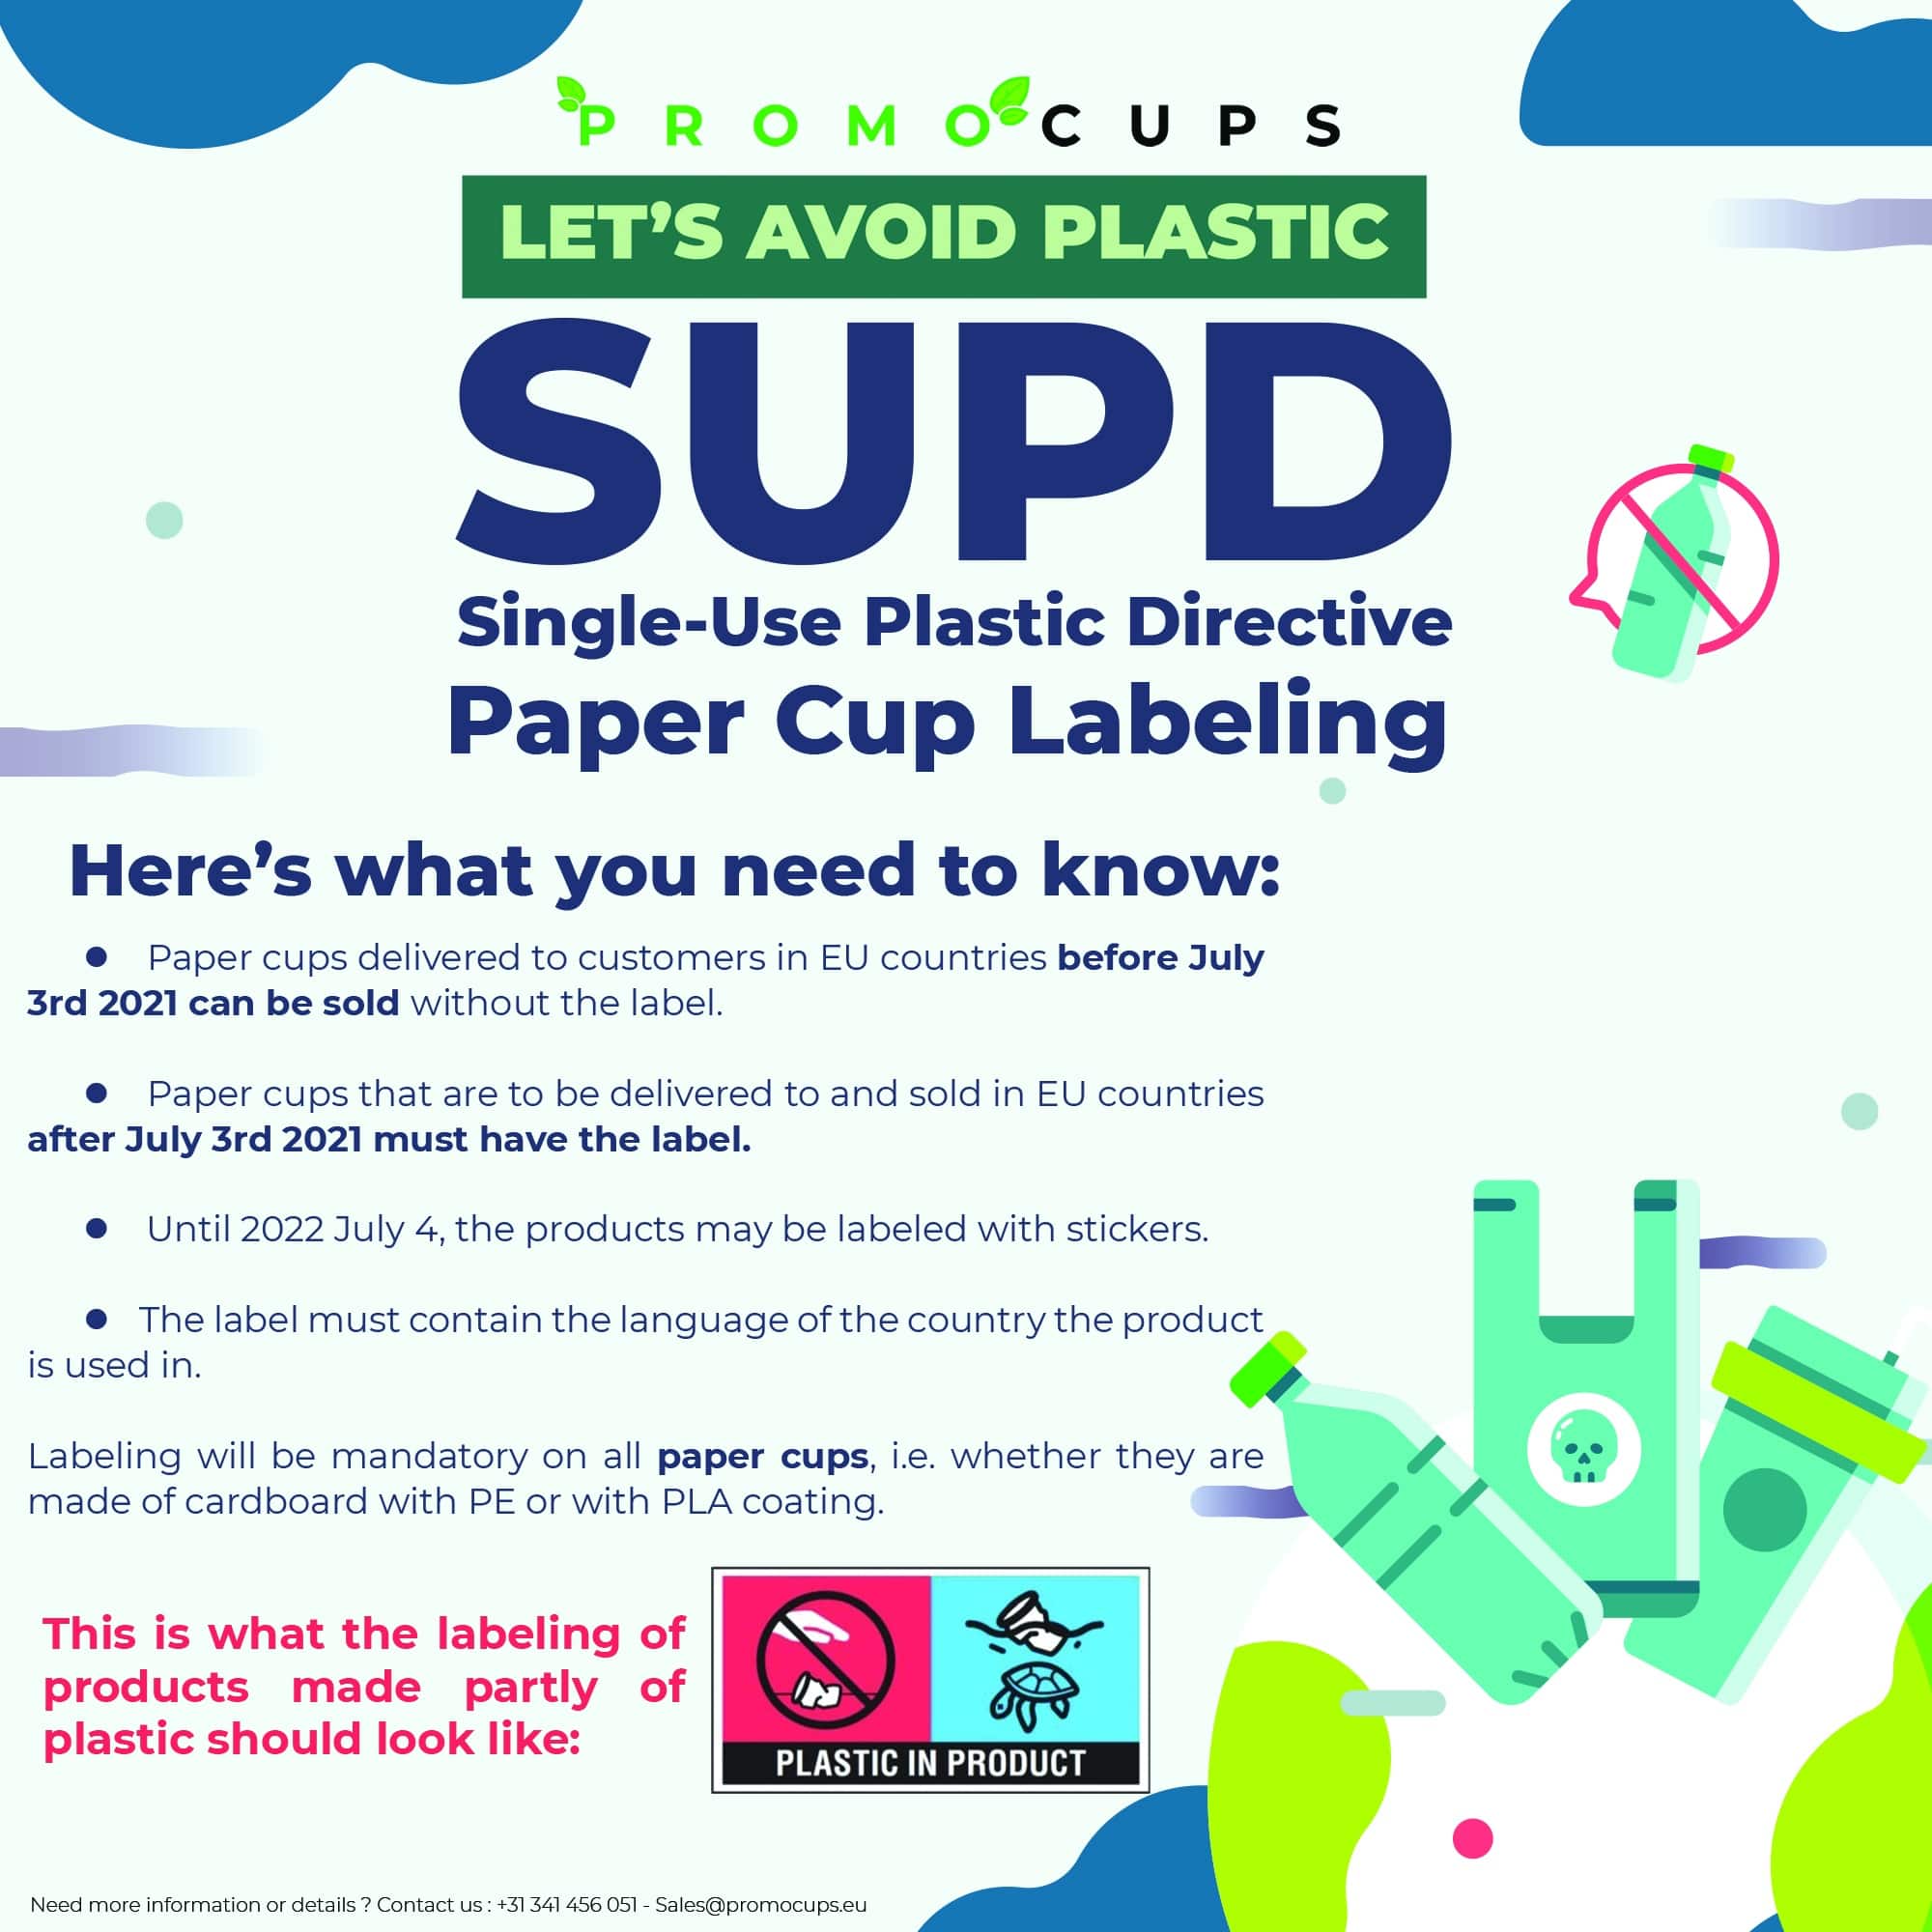 SUPD – label on paper cups with a plastic coating.